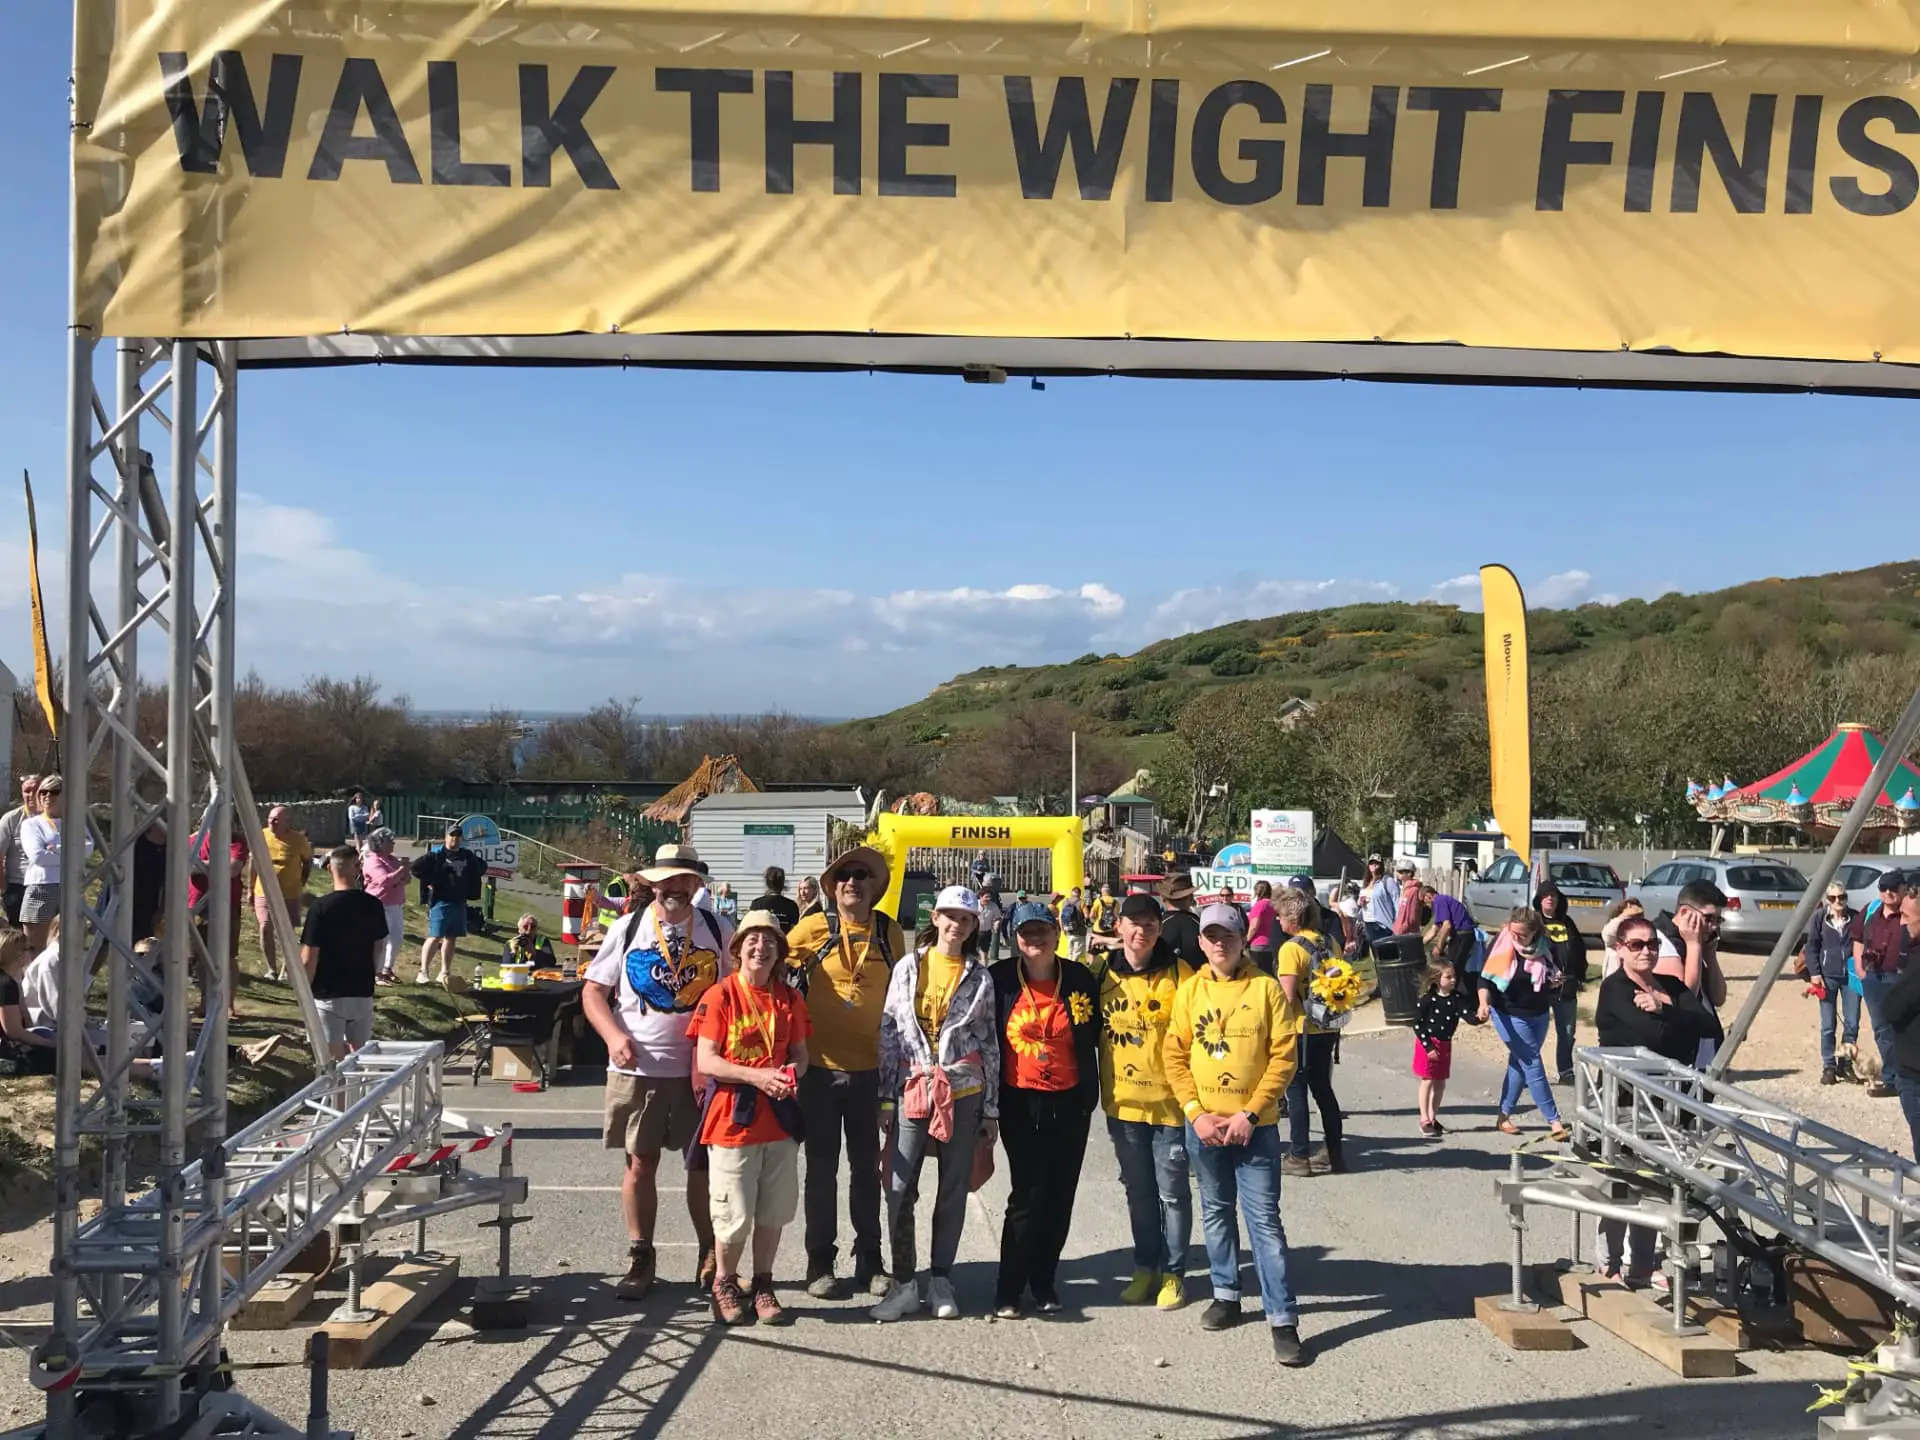 Chris and Barbara Jarman on Walk the Wight with displaced Ukrainians at finish line